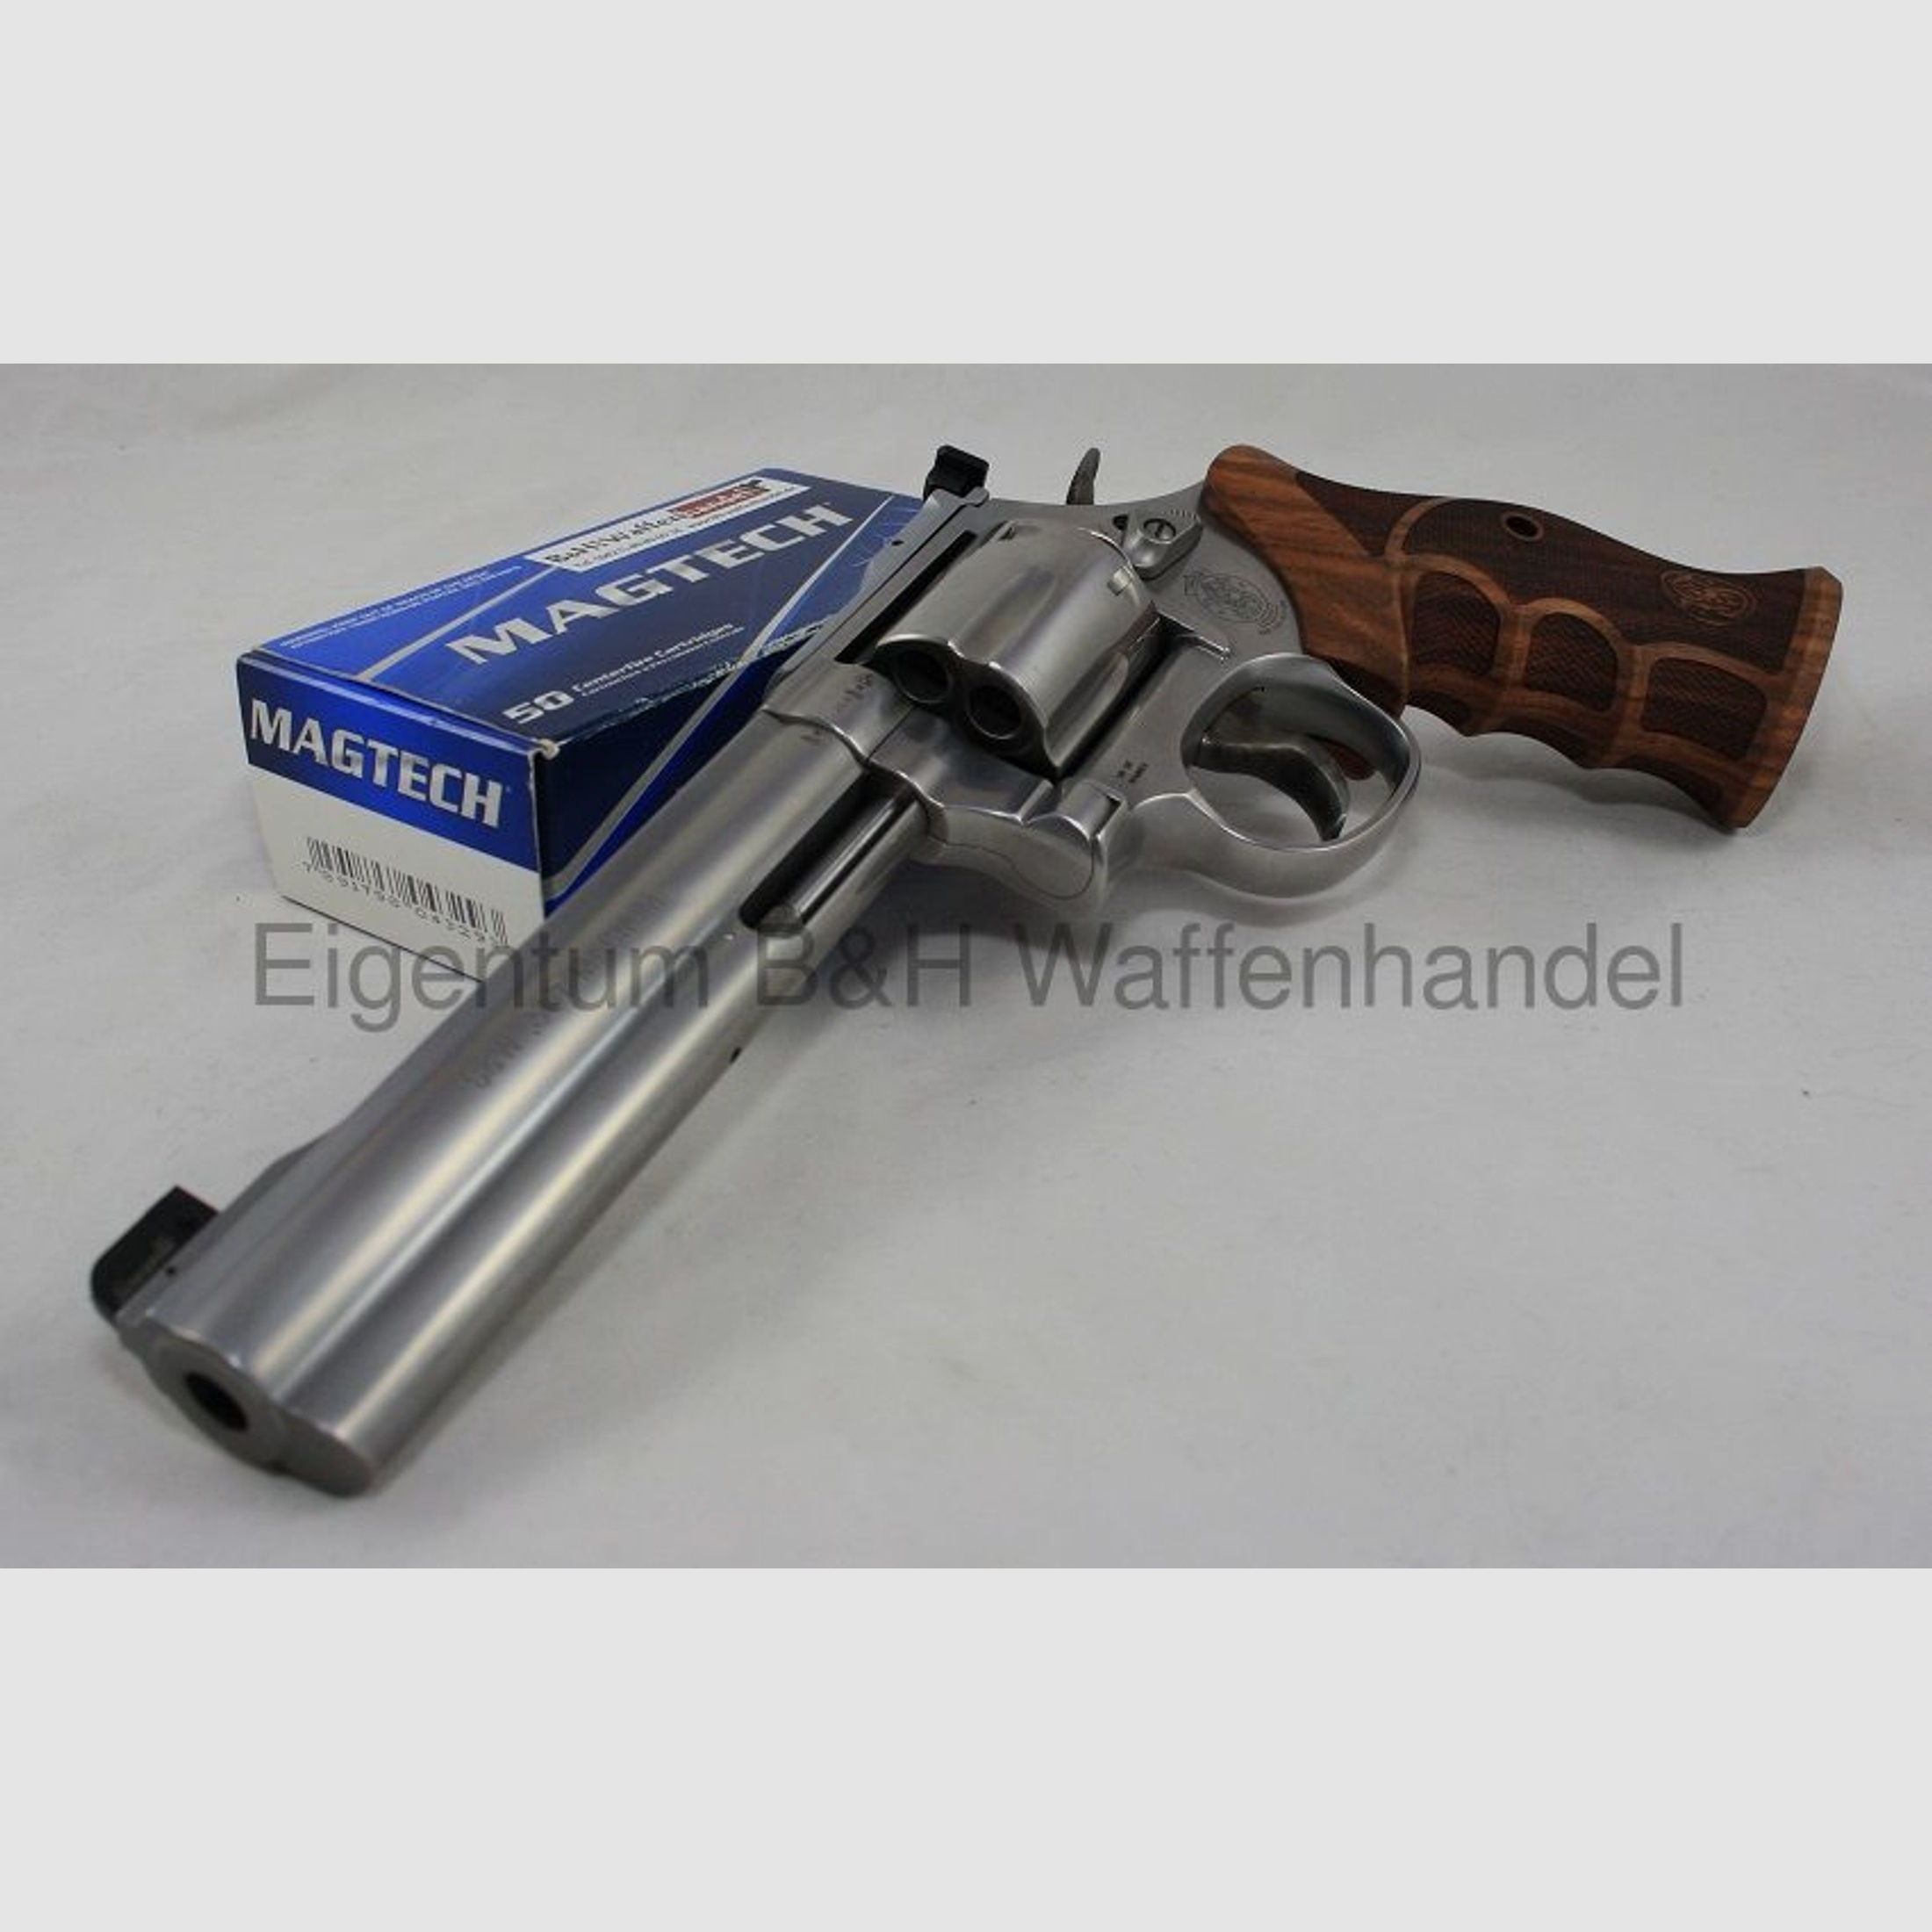 Smith & Wesson	 686 Target Champion Match Master Deluxe